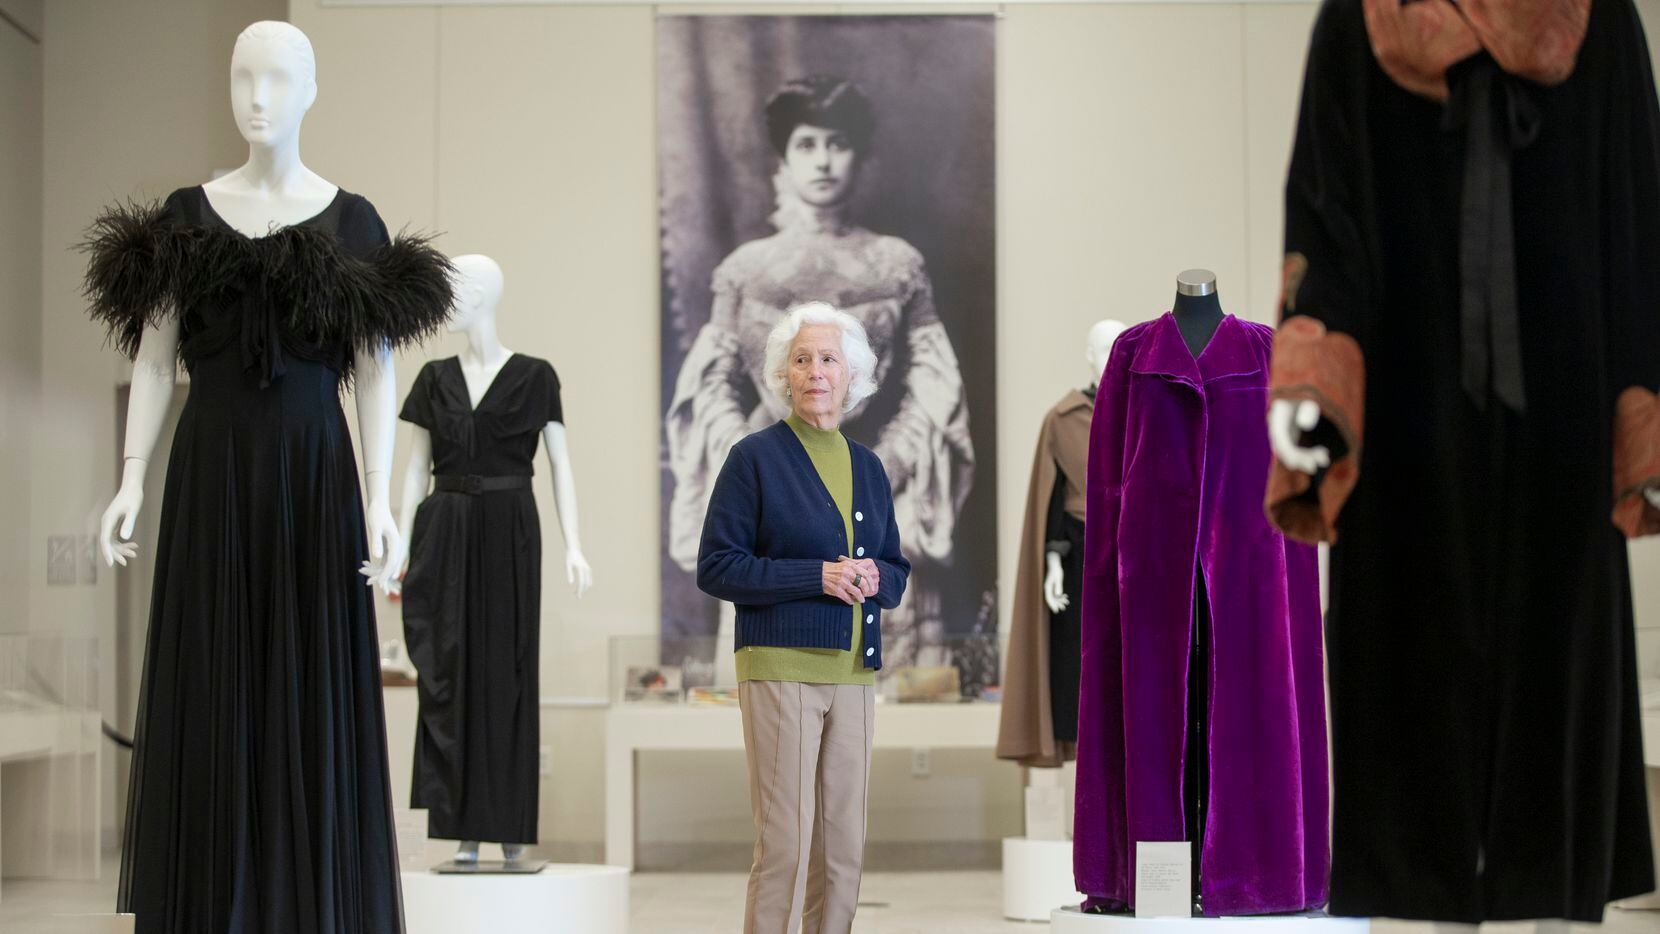 Jerrie Marcus Smith, 85, poses with coats and gowns from the Texas Fashion Collection...